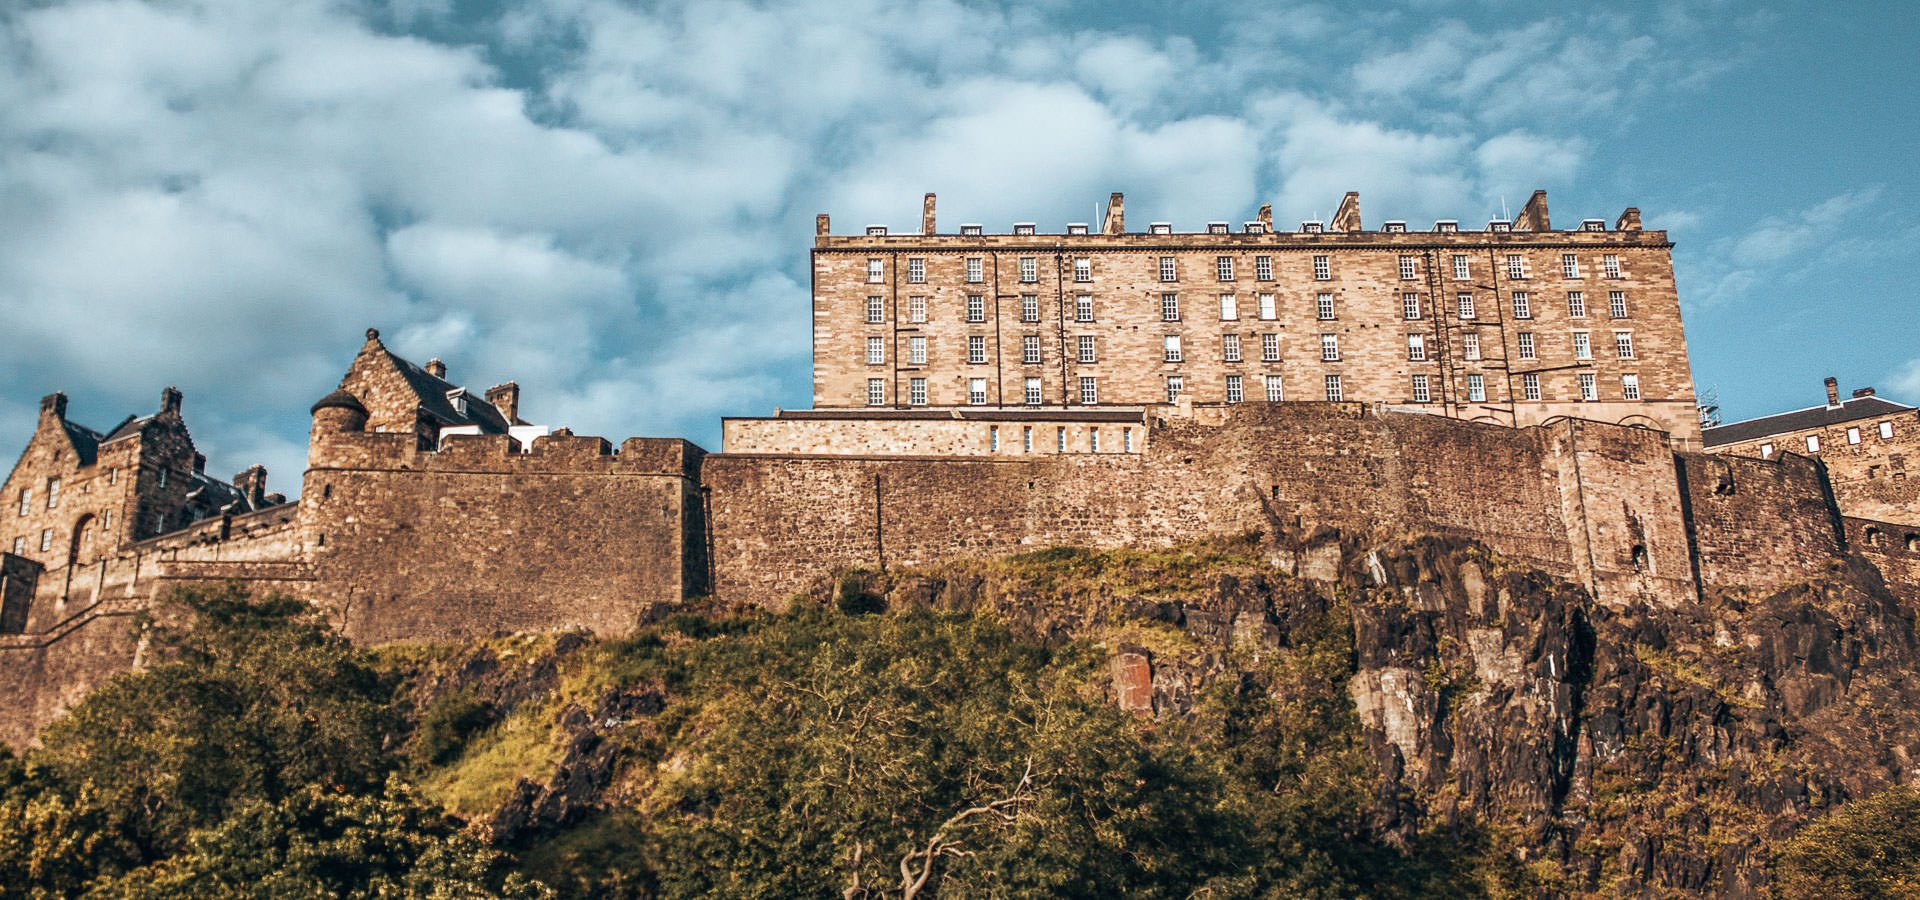 An Unmissable Guide To 48 Hours In Edinburgh | Stockholm in 2 days 6